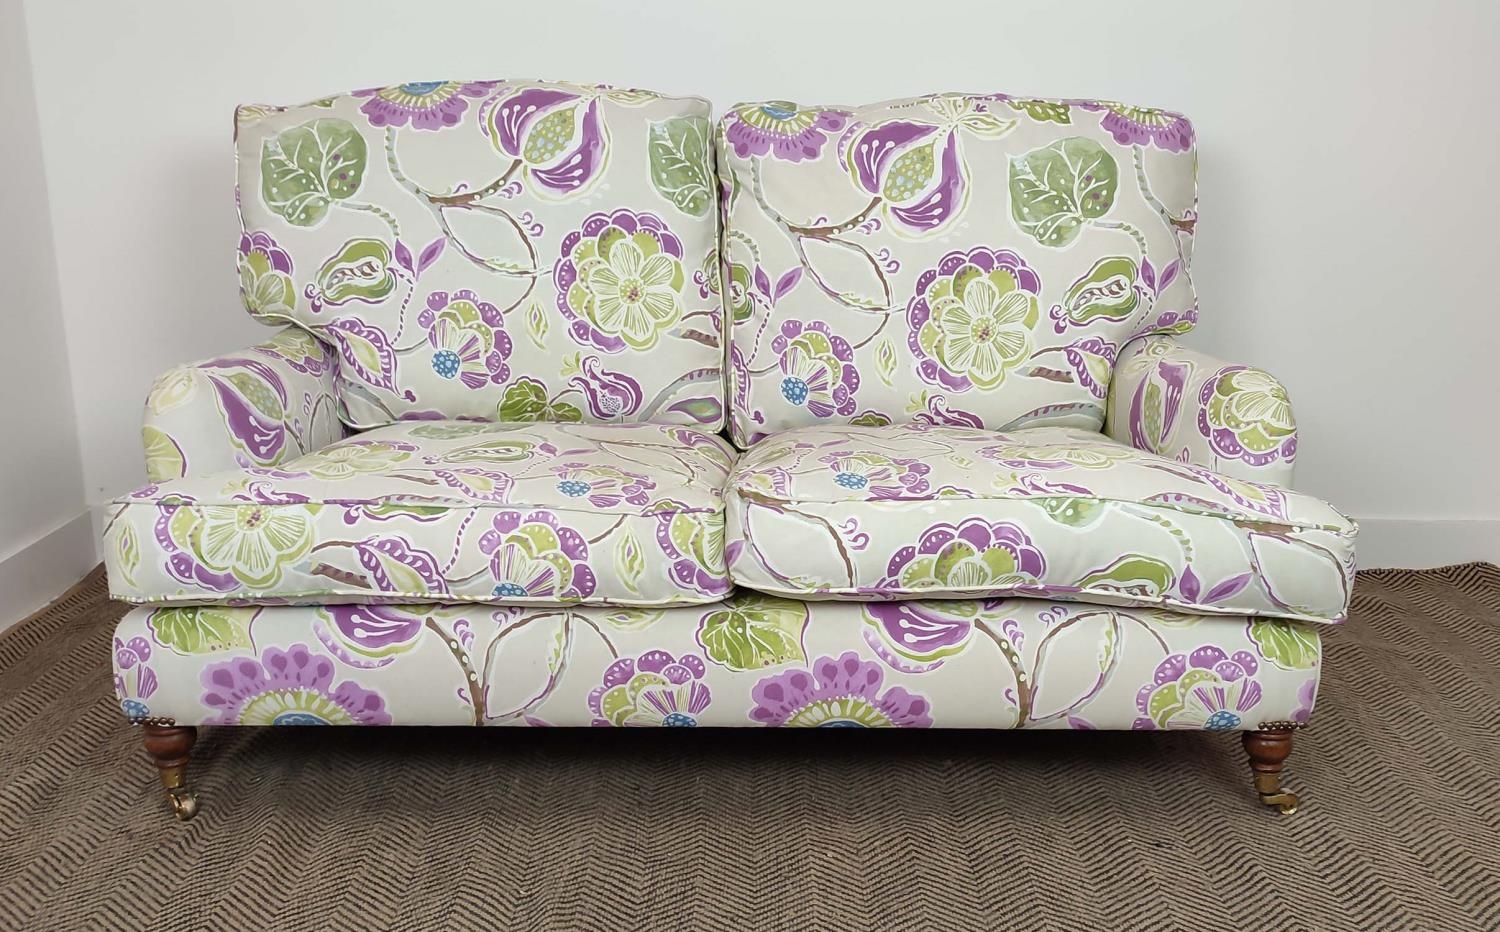 SOFA, purple and green floral patterned on brass castors, 90cm H x 160cm W. - Image 4 of 14